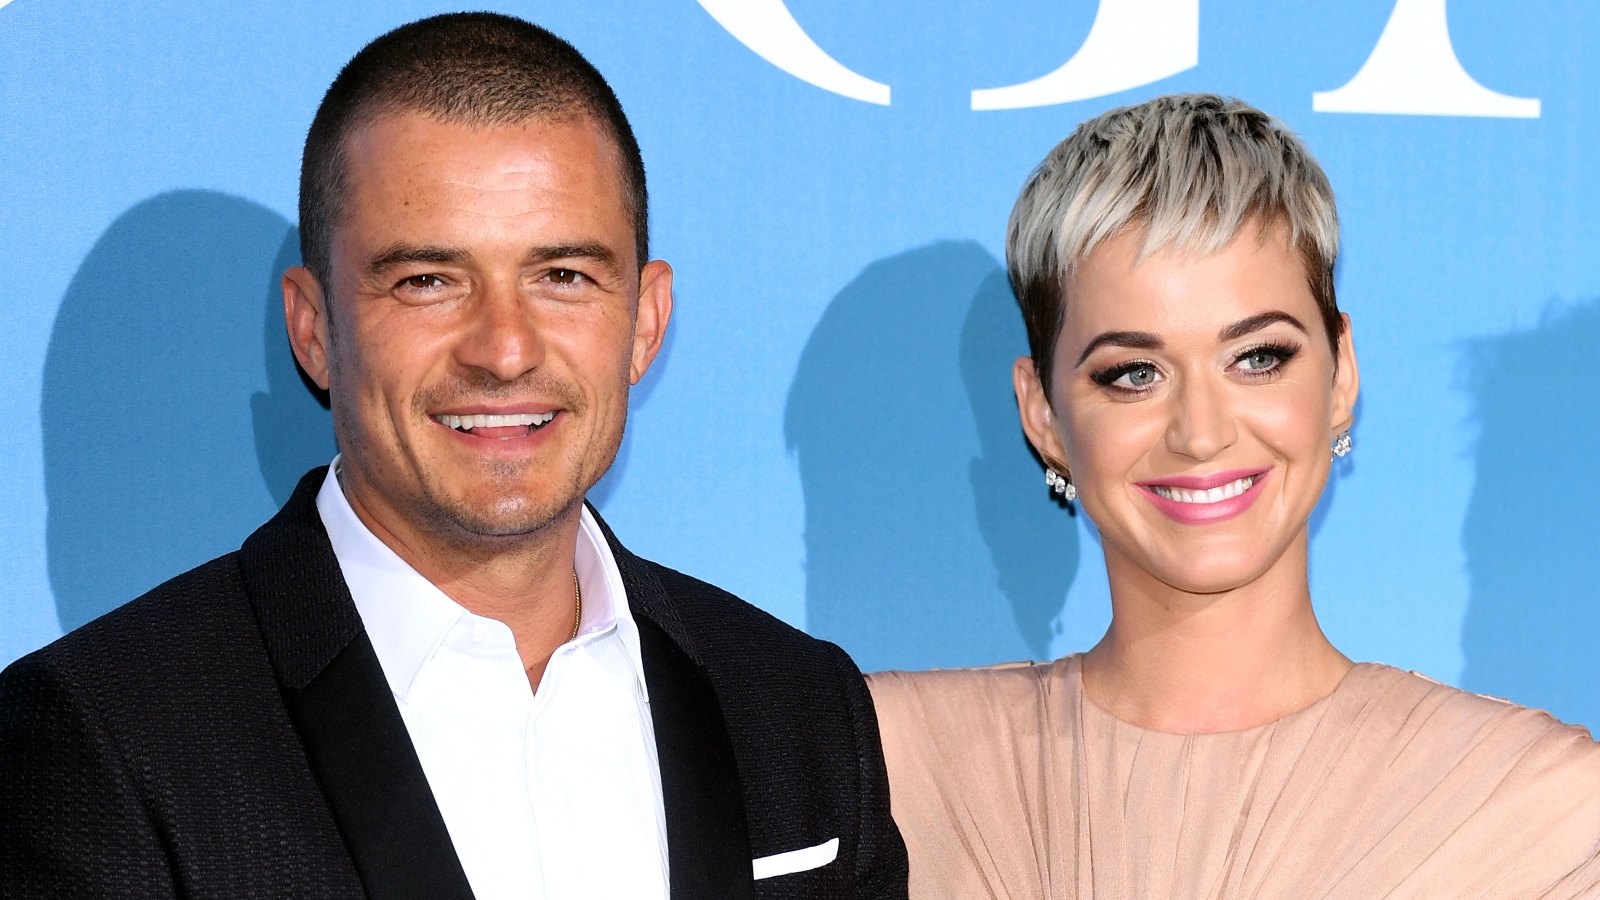 Katy-Perry-Says-She-Glad-Made-the-Right- Choice-Orlando-Bloom